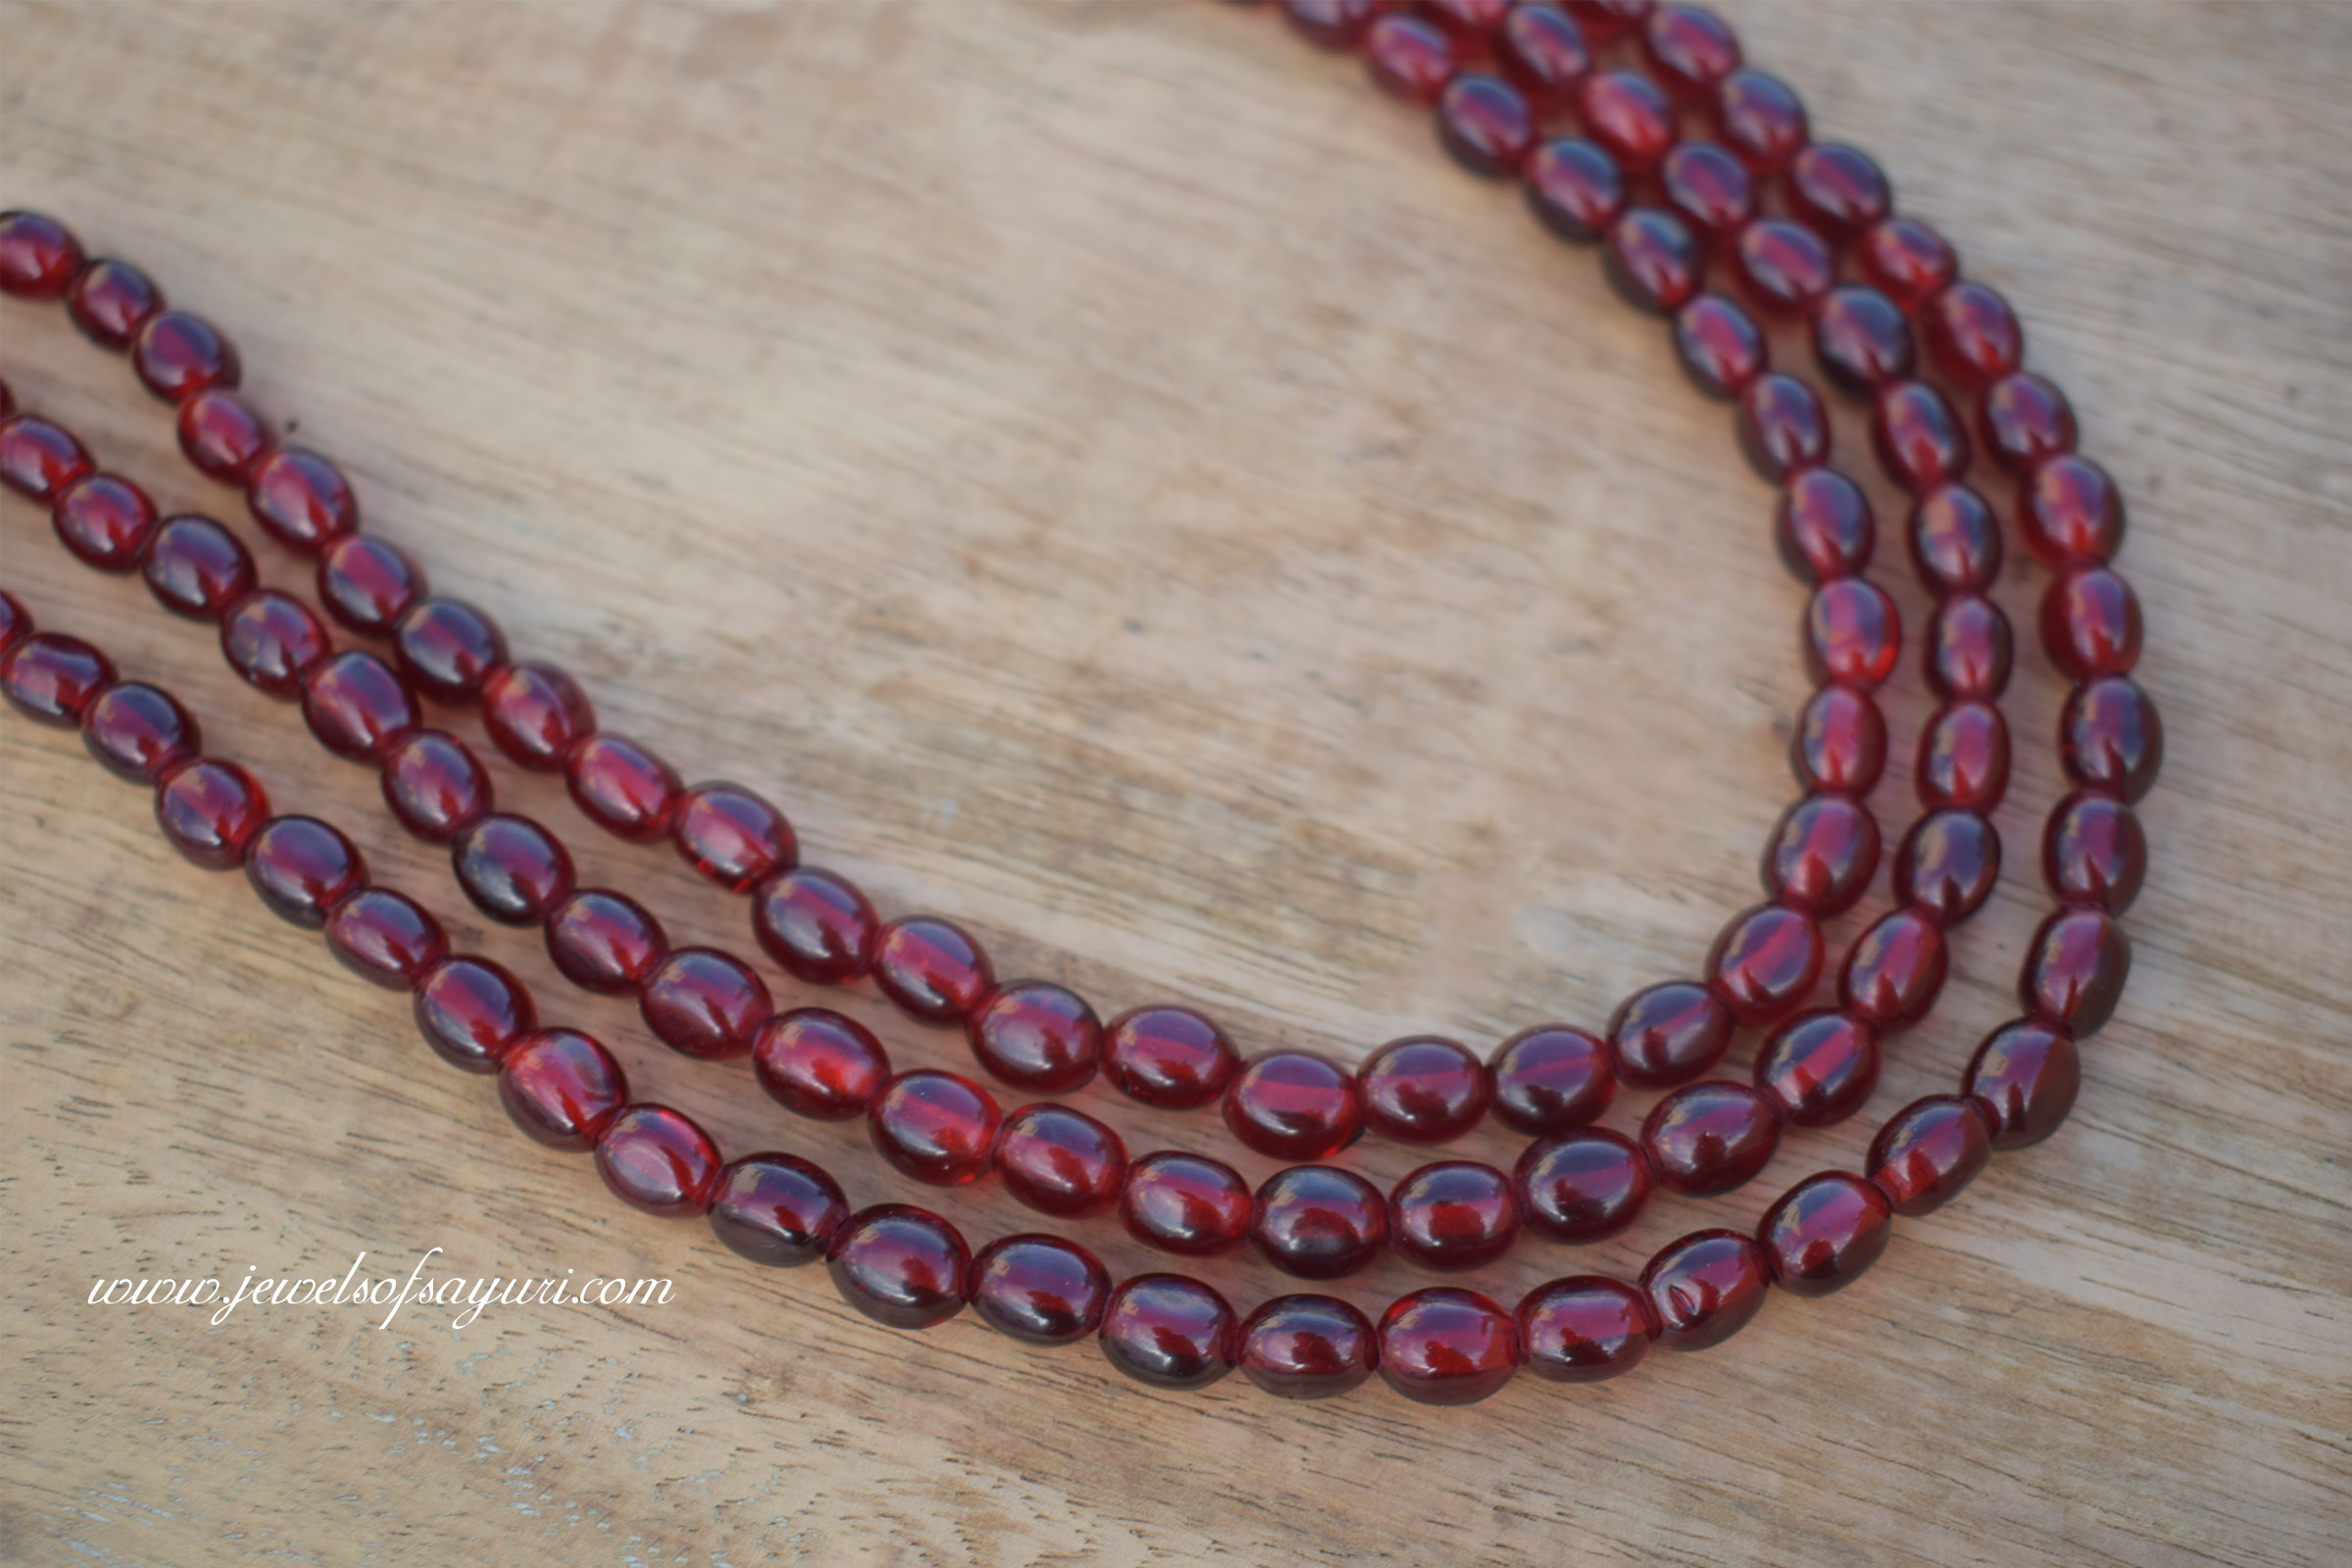 Berry based bead necklaces